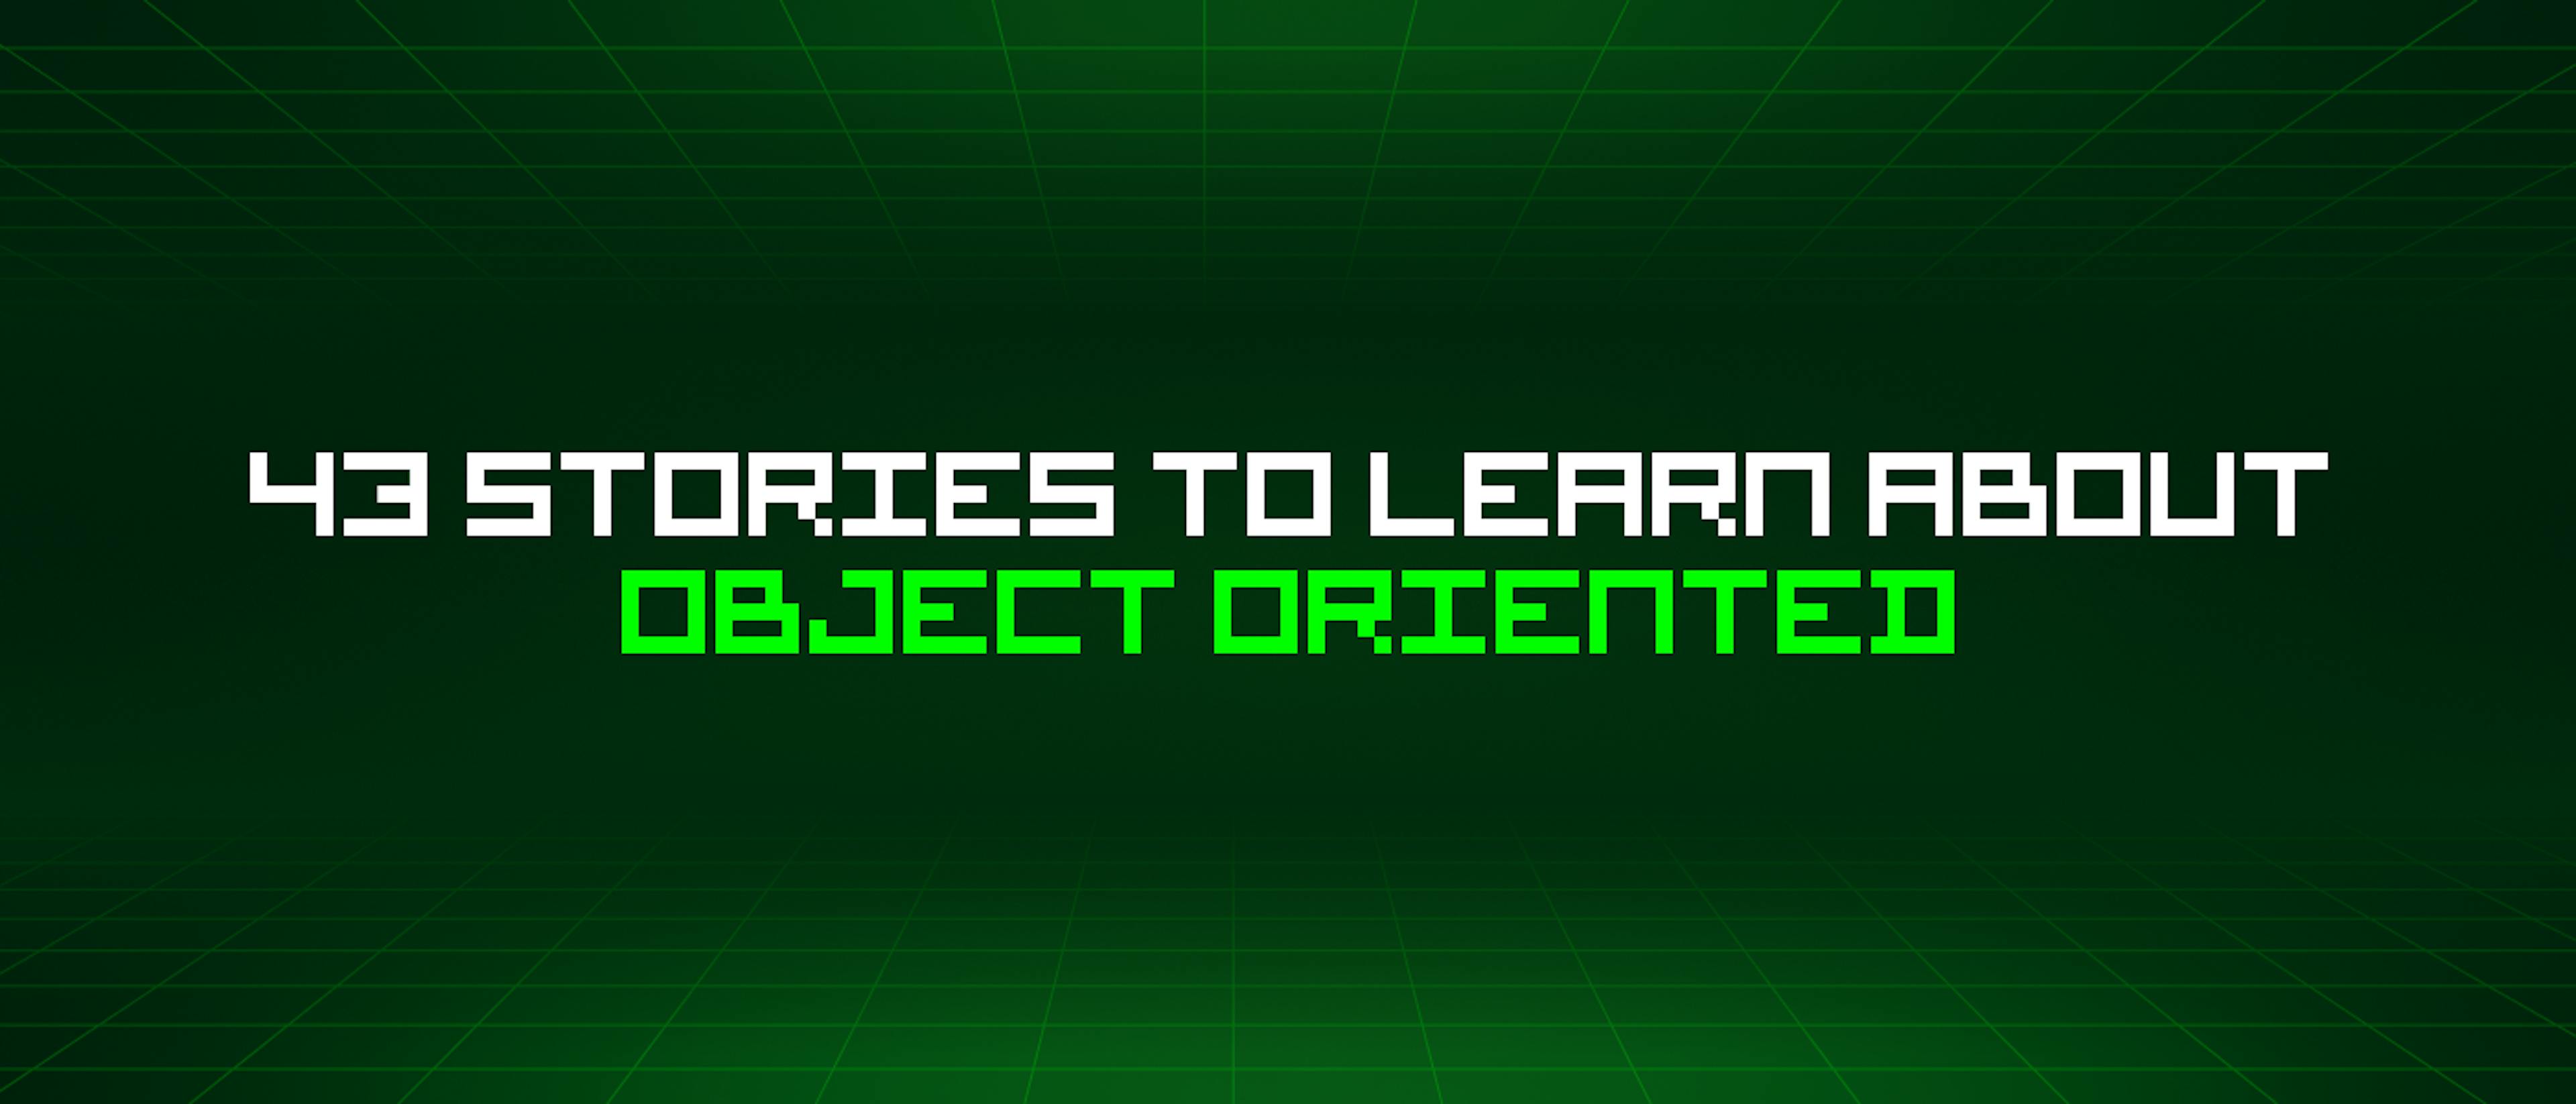 featured image - 43 Stories To Learn About Object Oriented